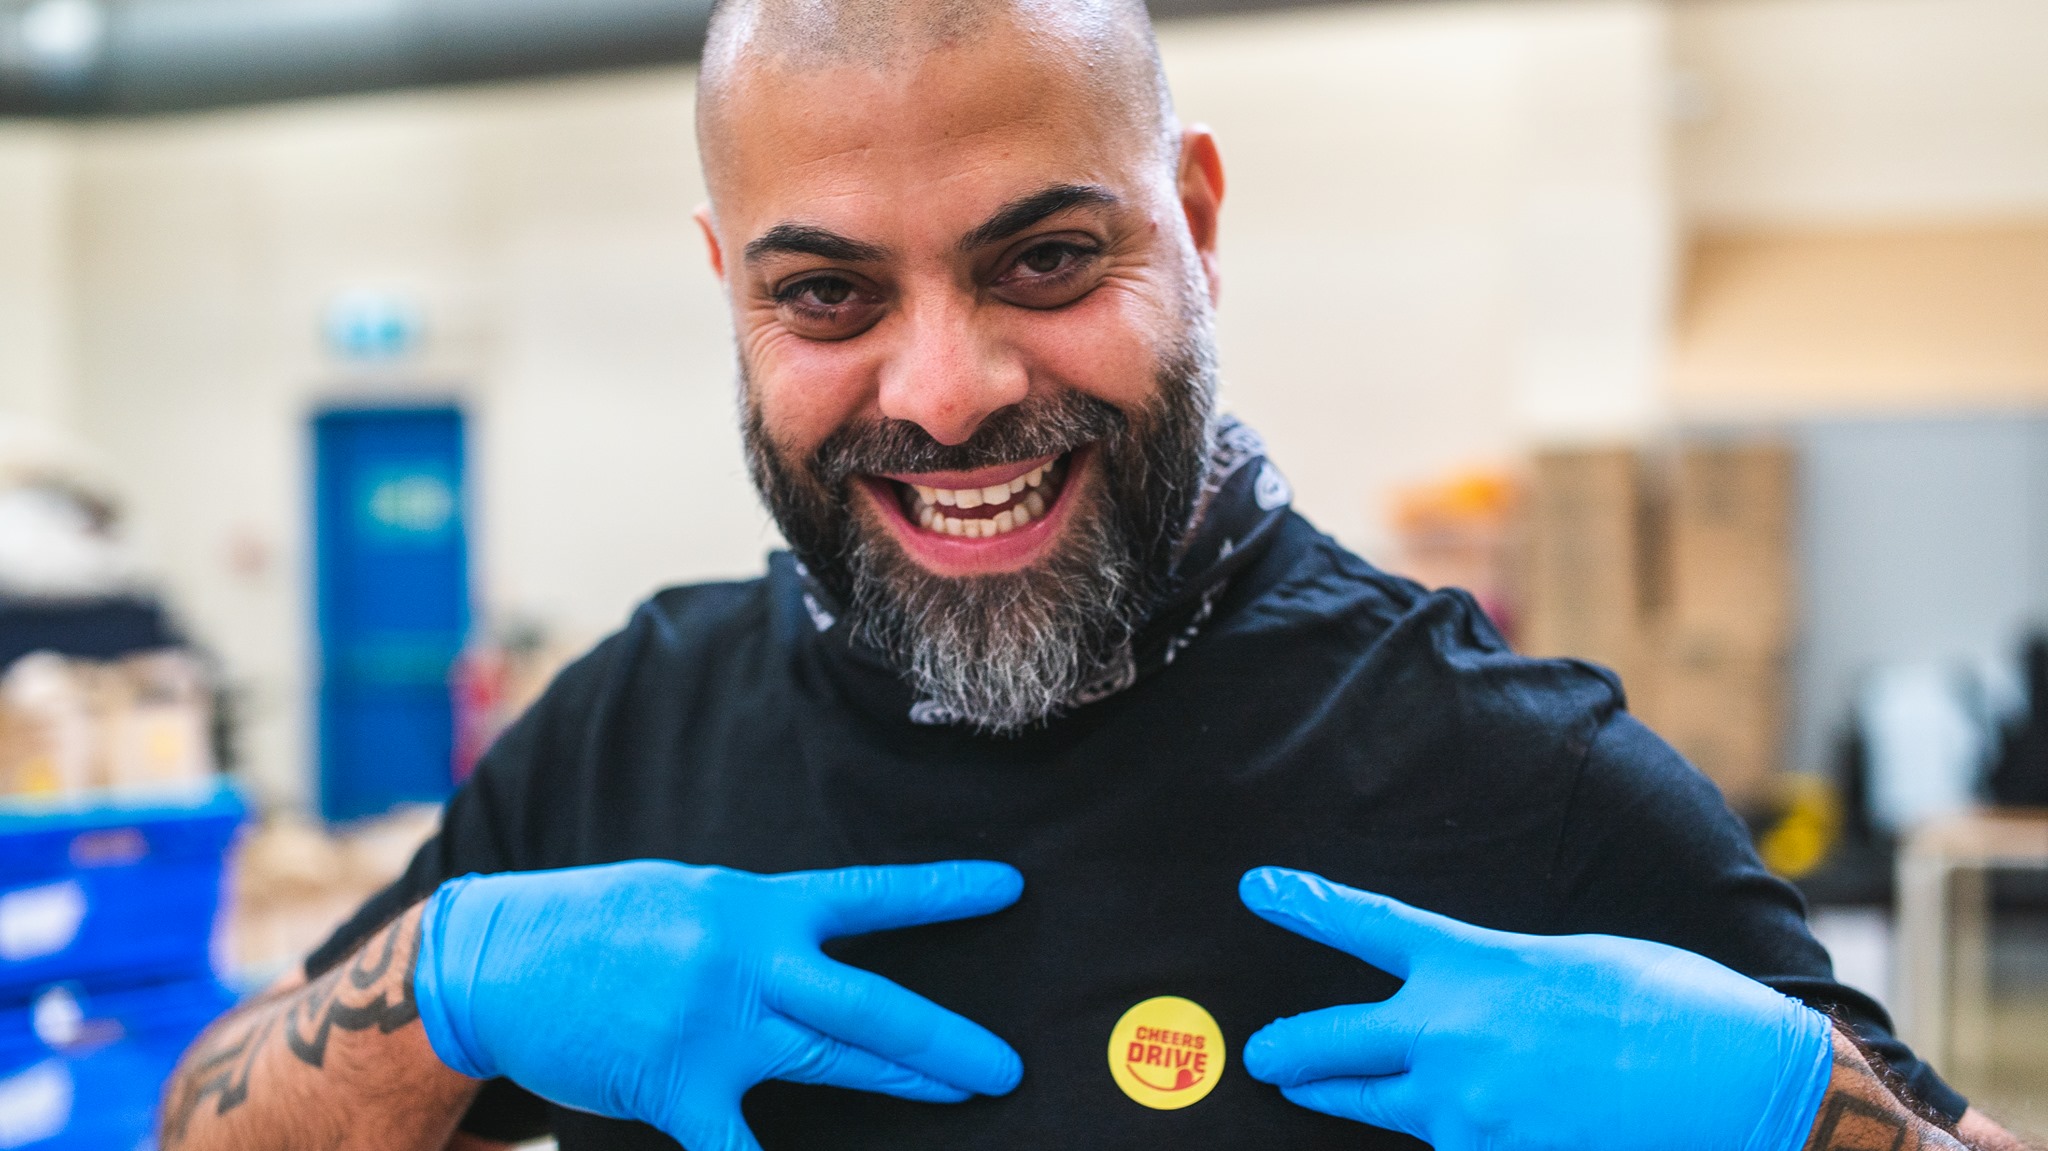 A smiling man gesturing towards a Cheers Drive badge on his blue chef's overalls